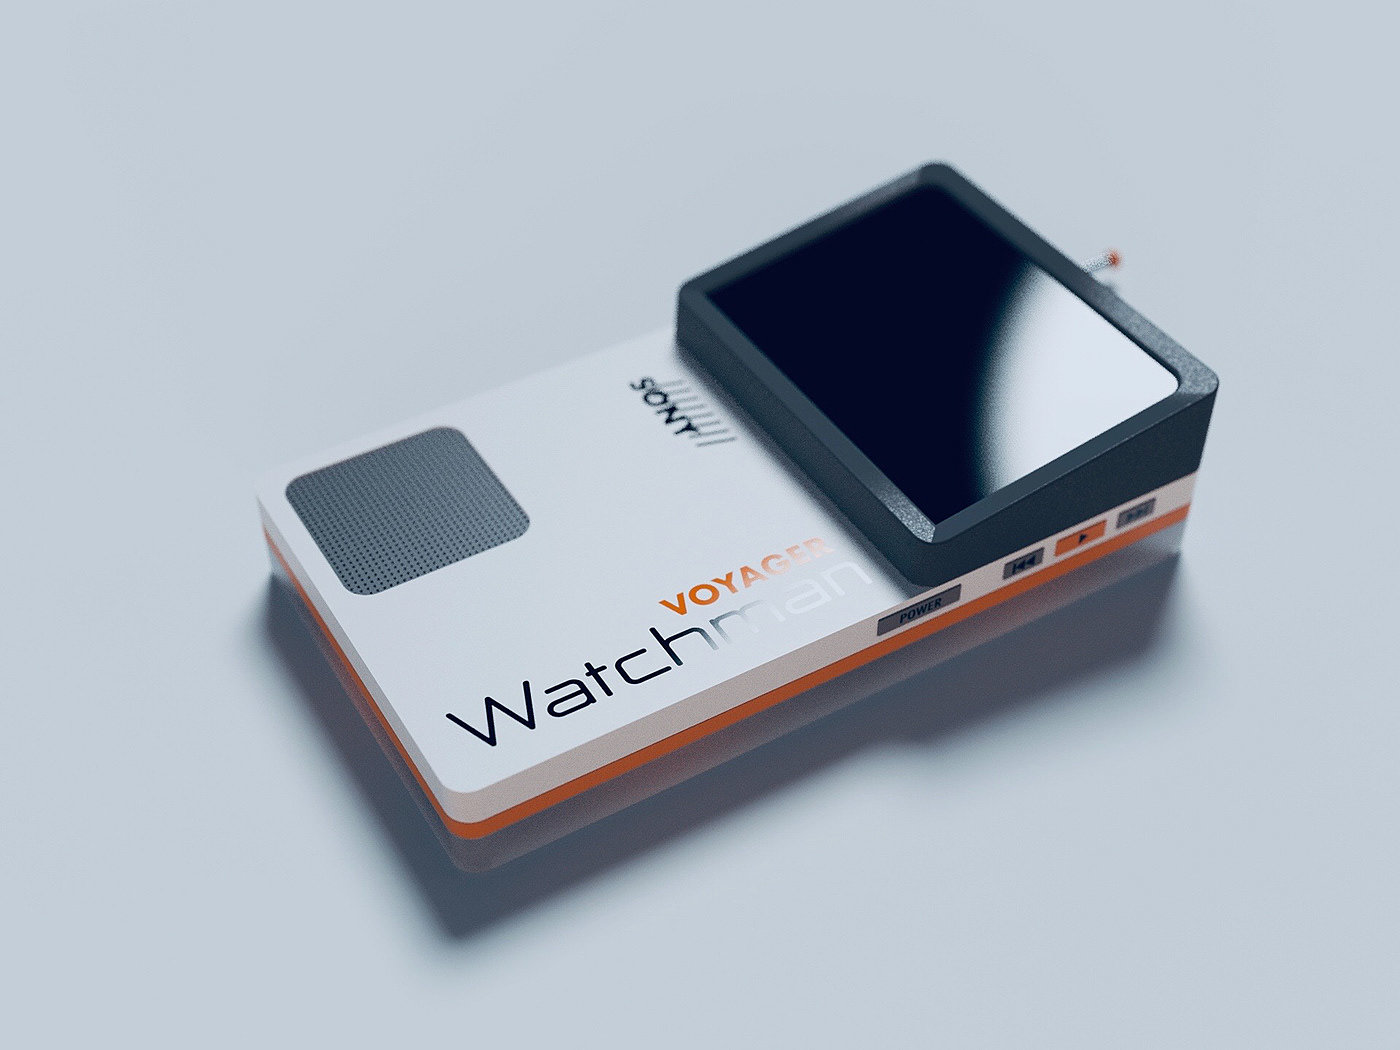 sony，Watchman，电视机，复古，redesign，